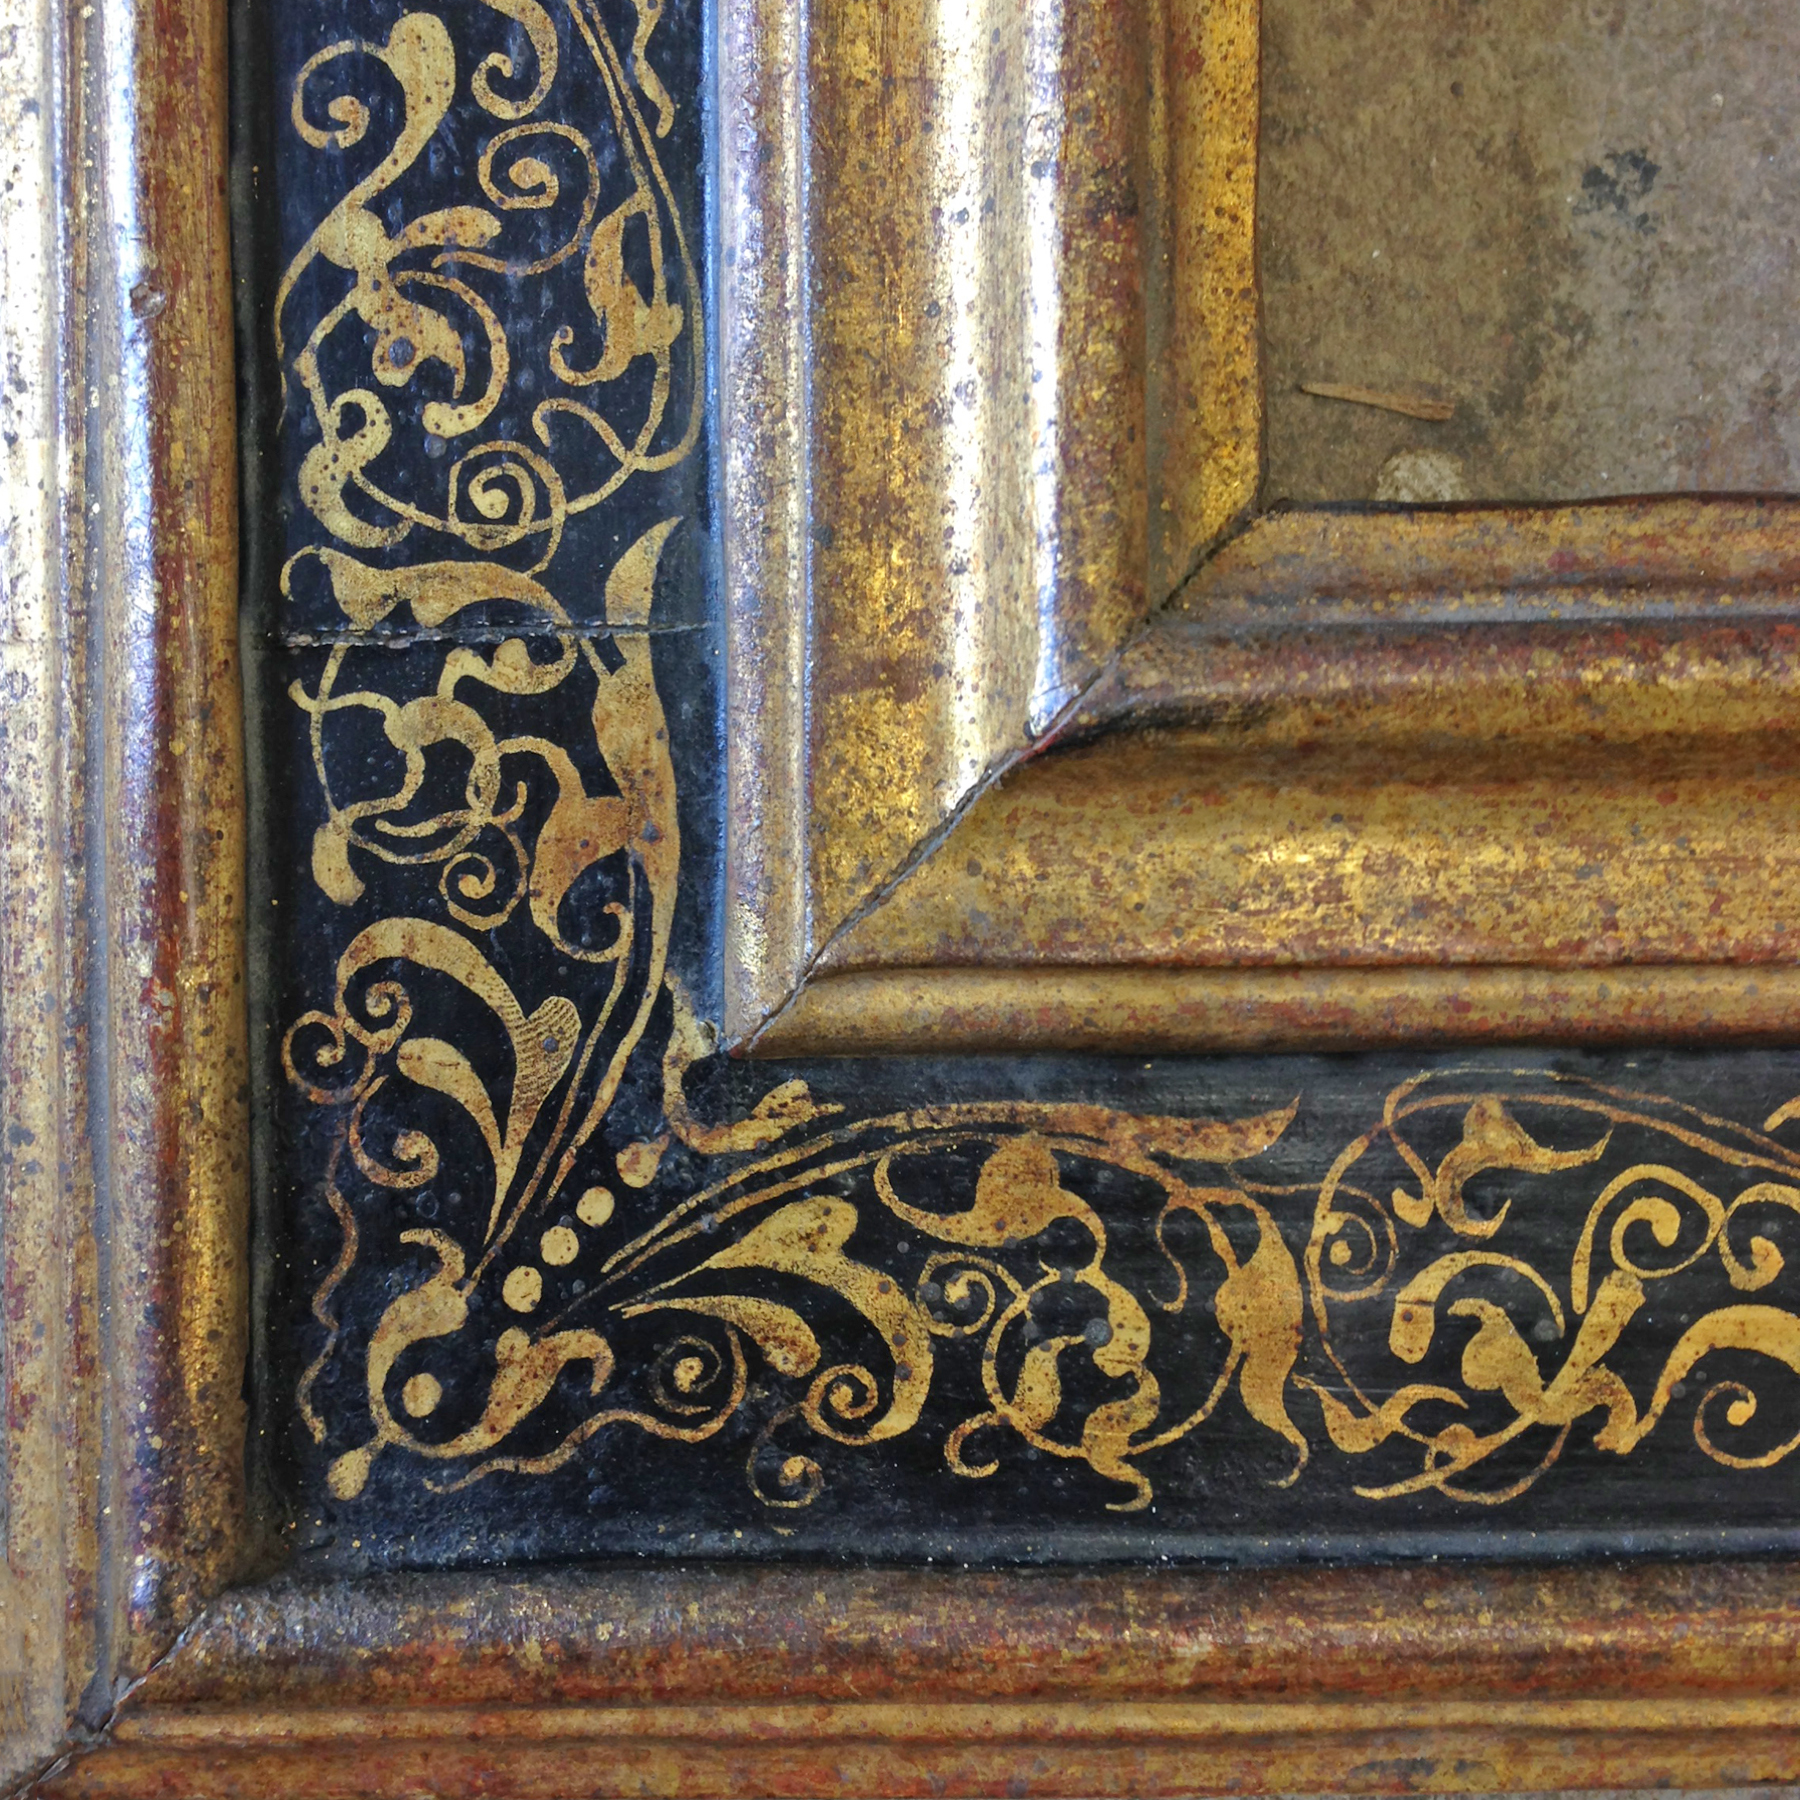 Reproduction 16th century frame